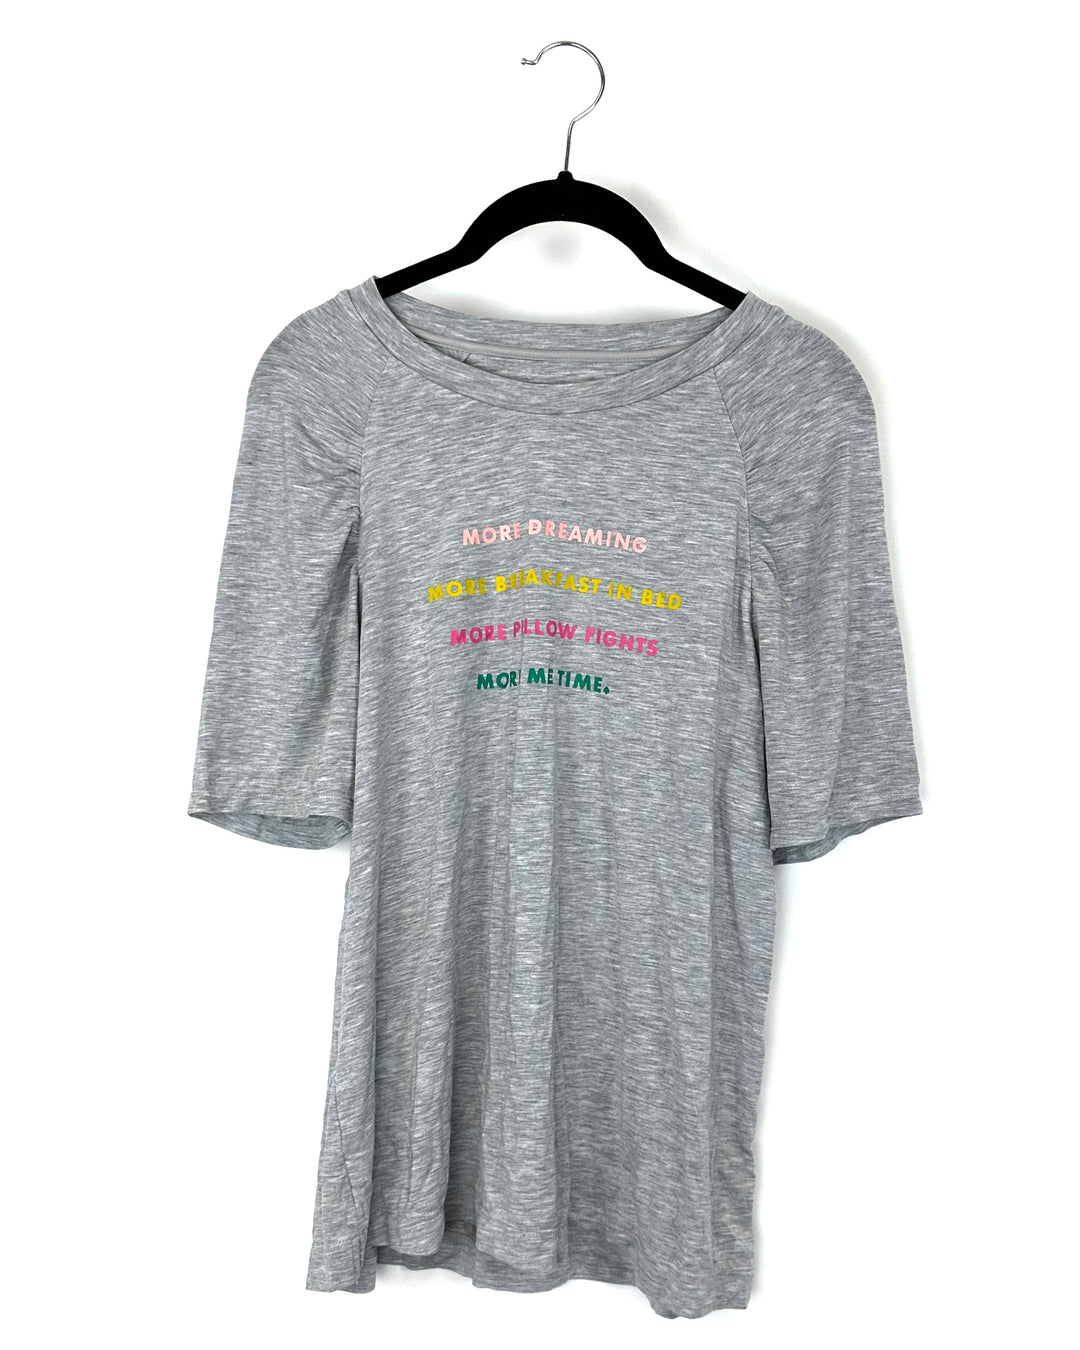 Light Gray Colorful Quote Sleepwear Shirt - Small